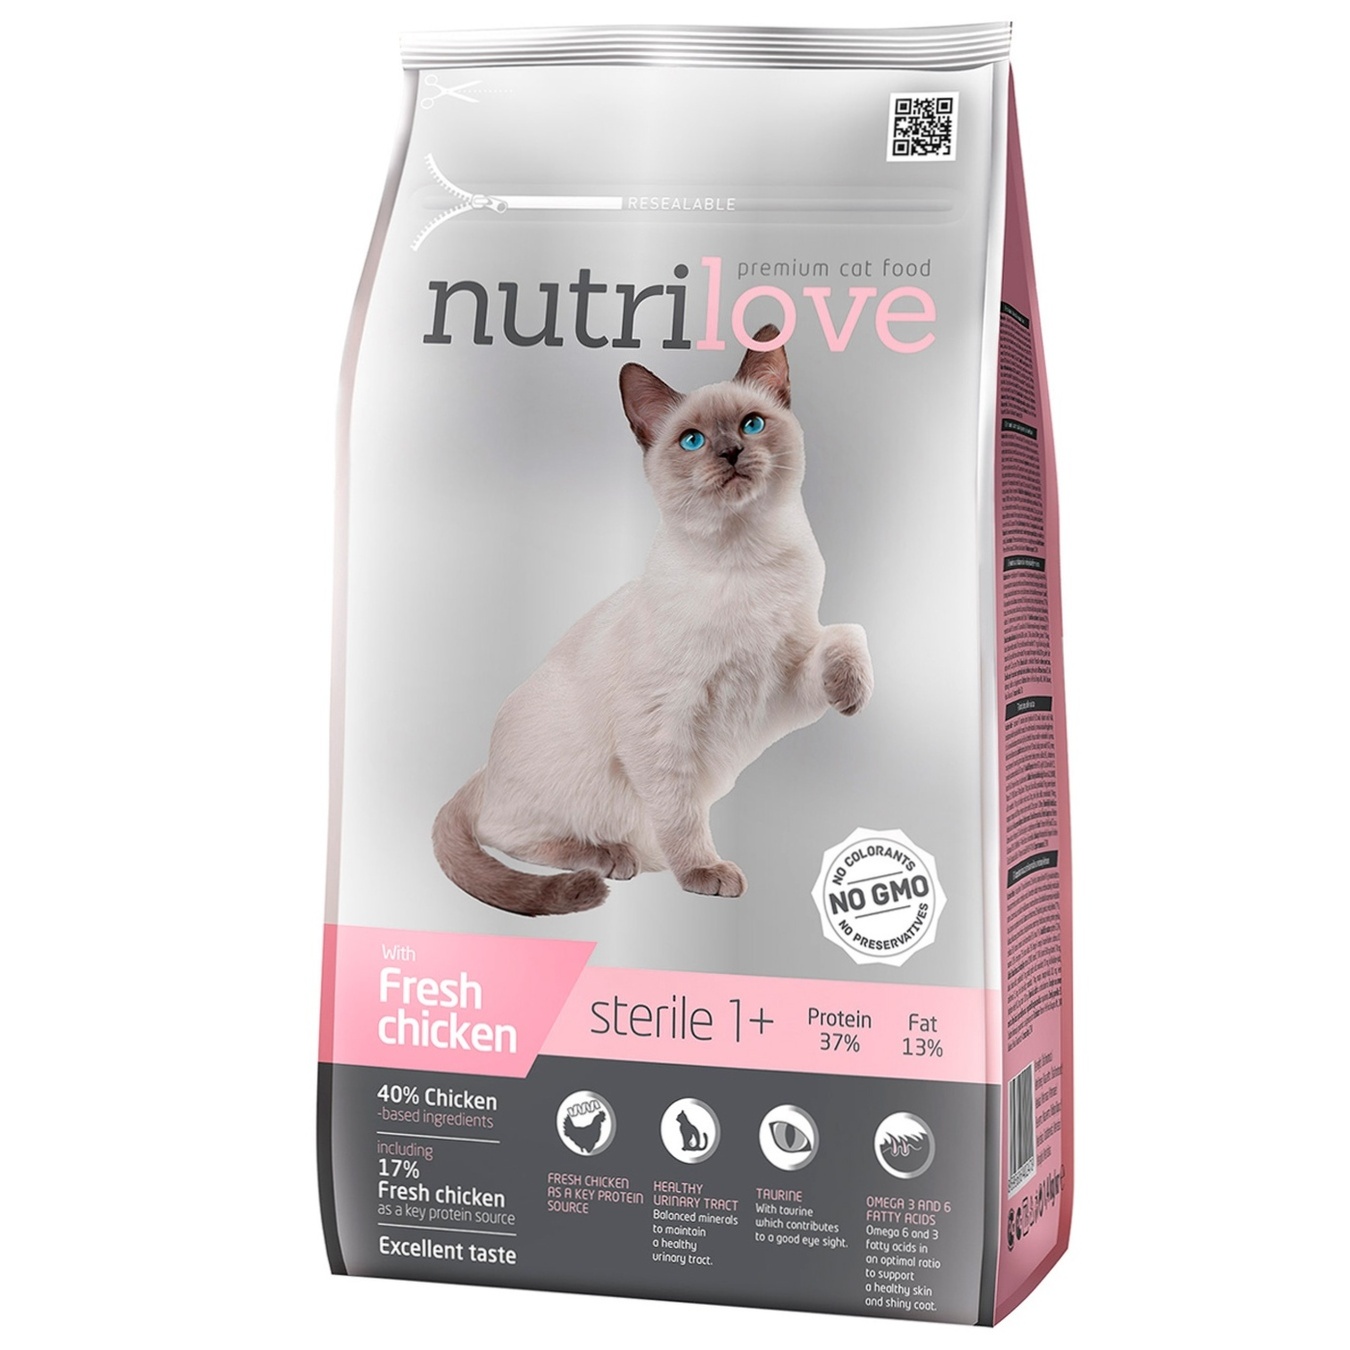 Nutrilove dry cat food for sterilized cats with fresh chicken 1.4 kg